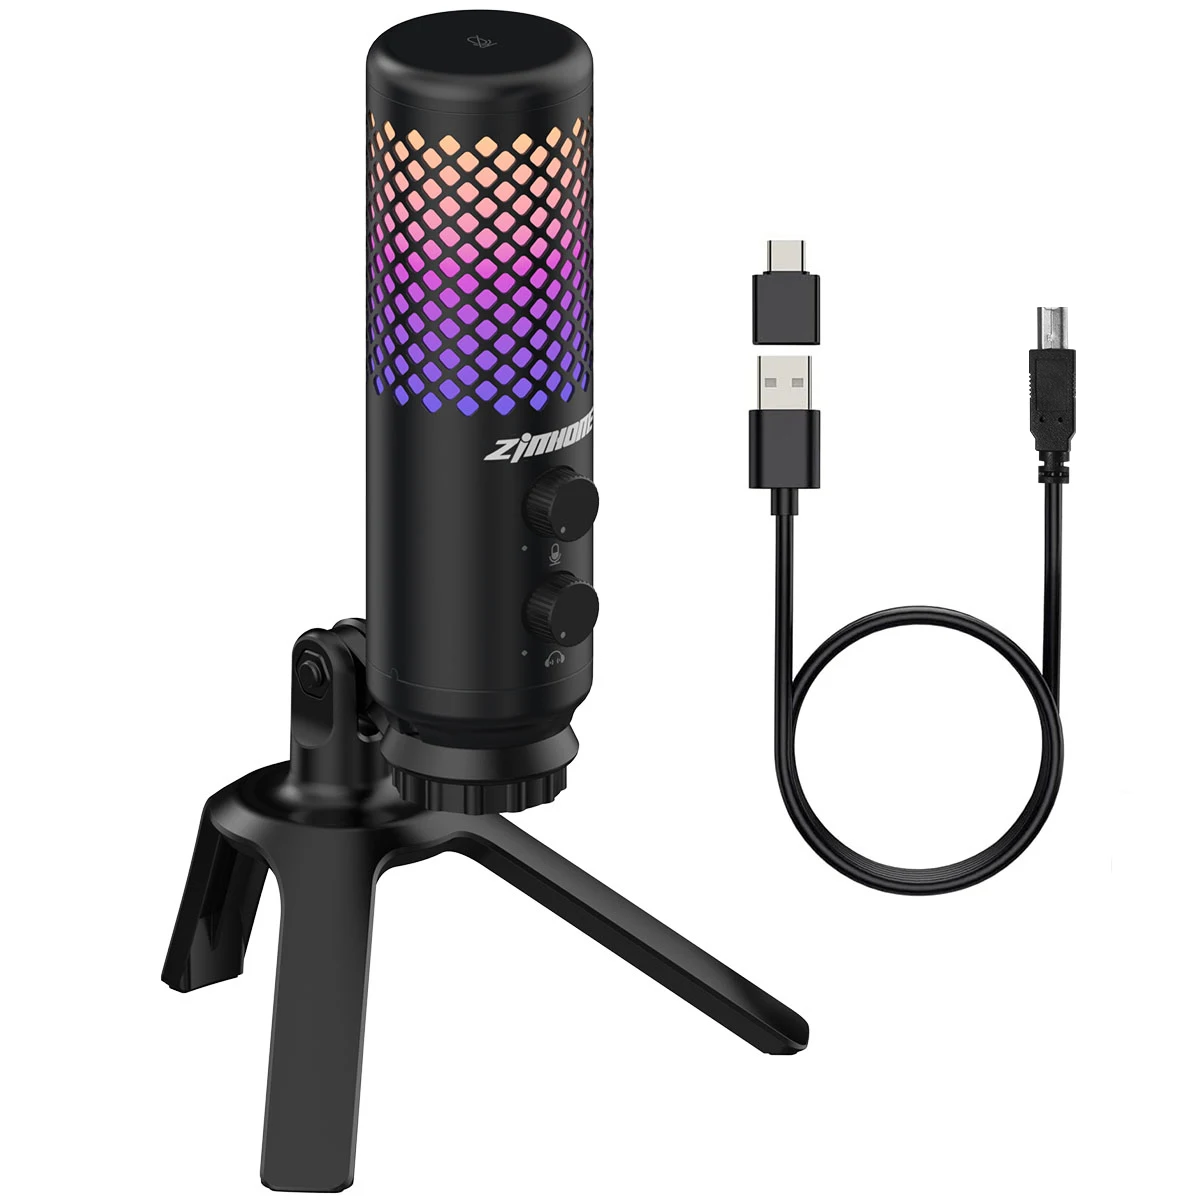 

Professional Studio Voice Recording condenser microphone RGB USB Podcast Gaming mic for computer PC Condenser Gamer Microphone